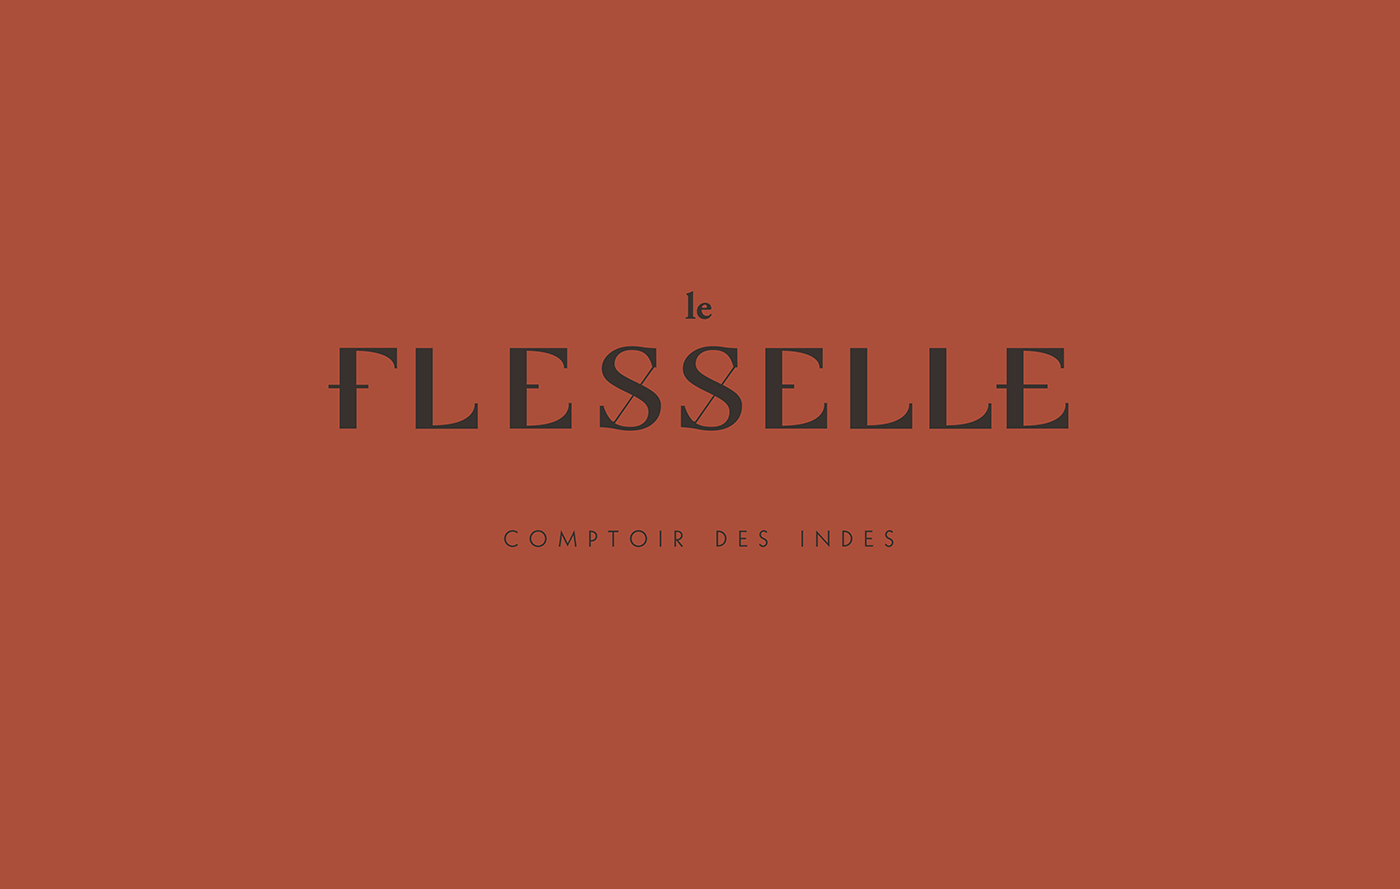 Flesselle Nantes Coffee Trade shiping India Retail bar cookies textile spicies figues drawings strawberry cake